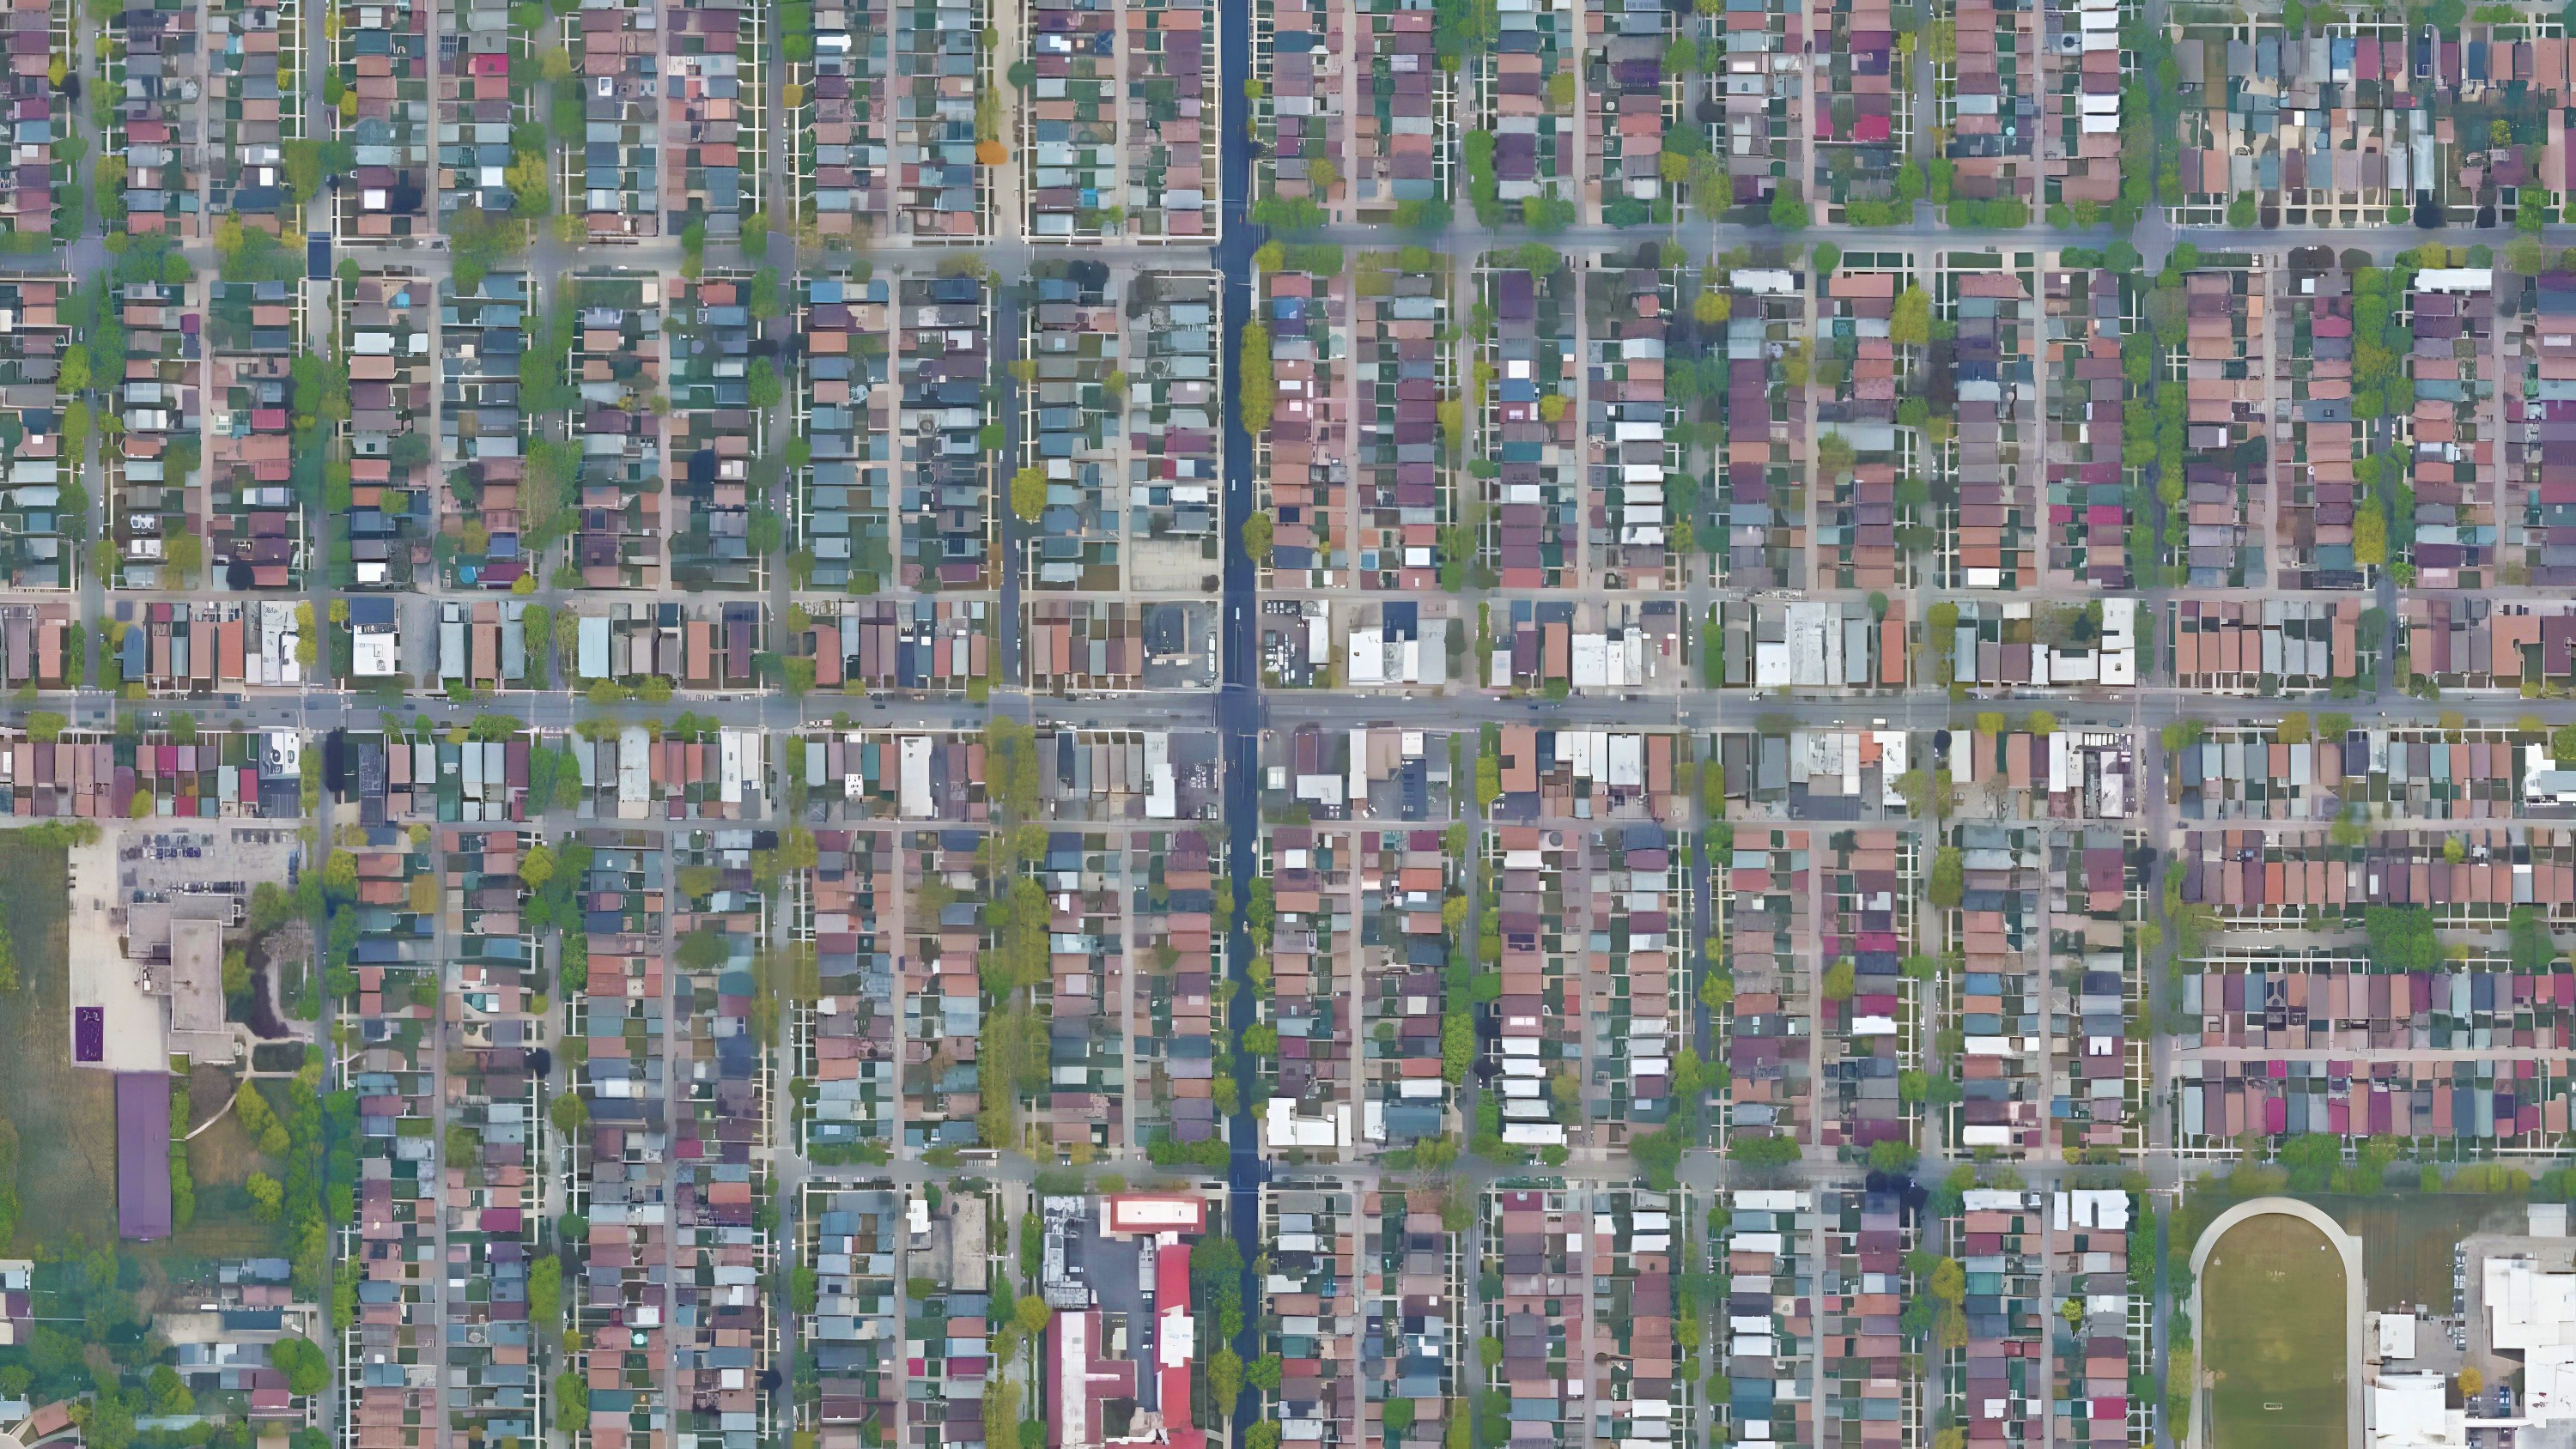 Rows of houses surrounded by streets and trees and grass as seen from above.